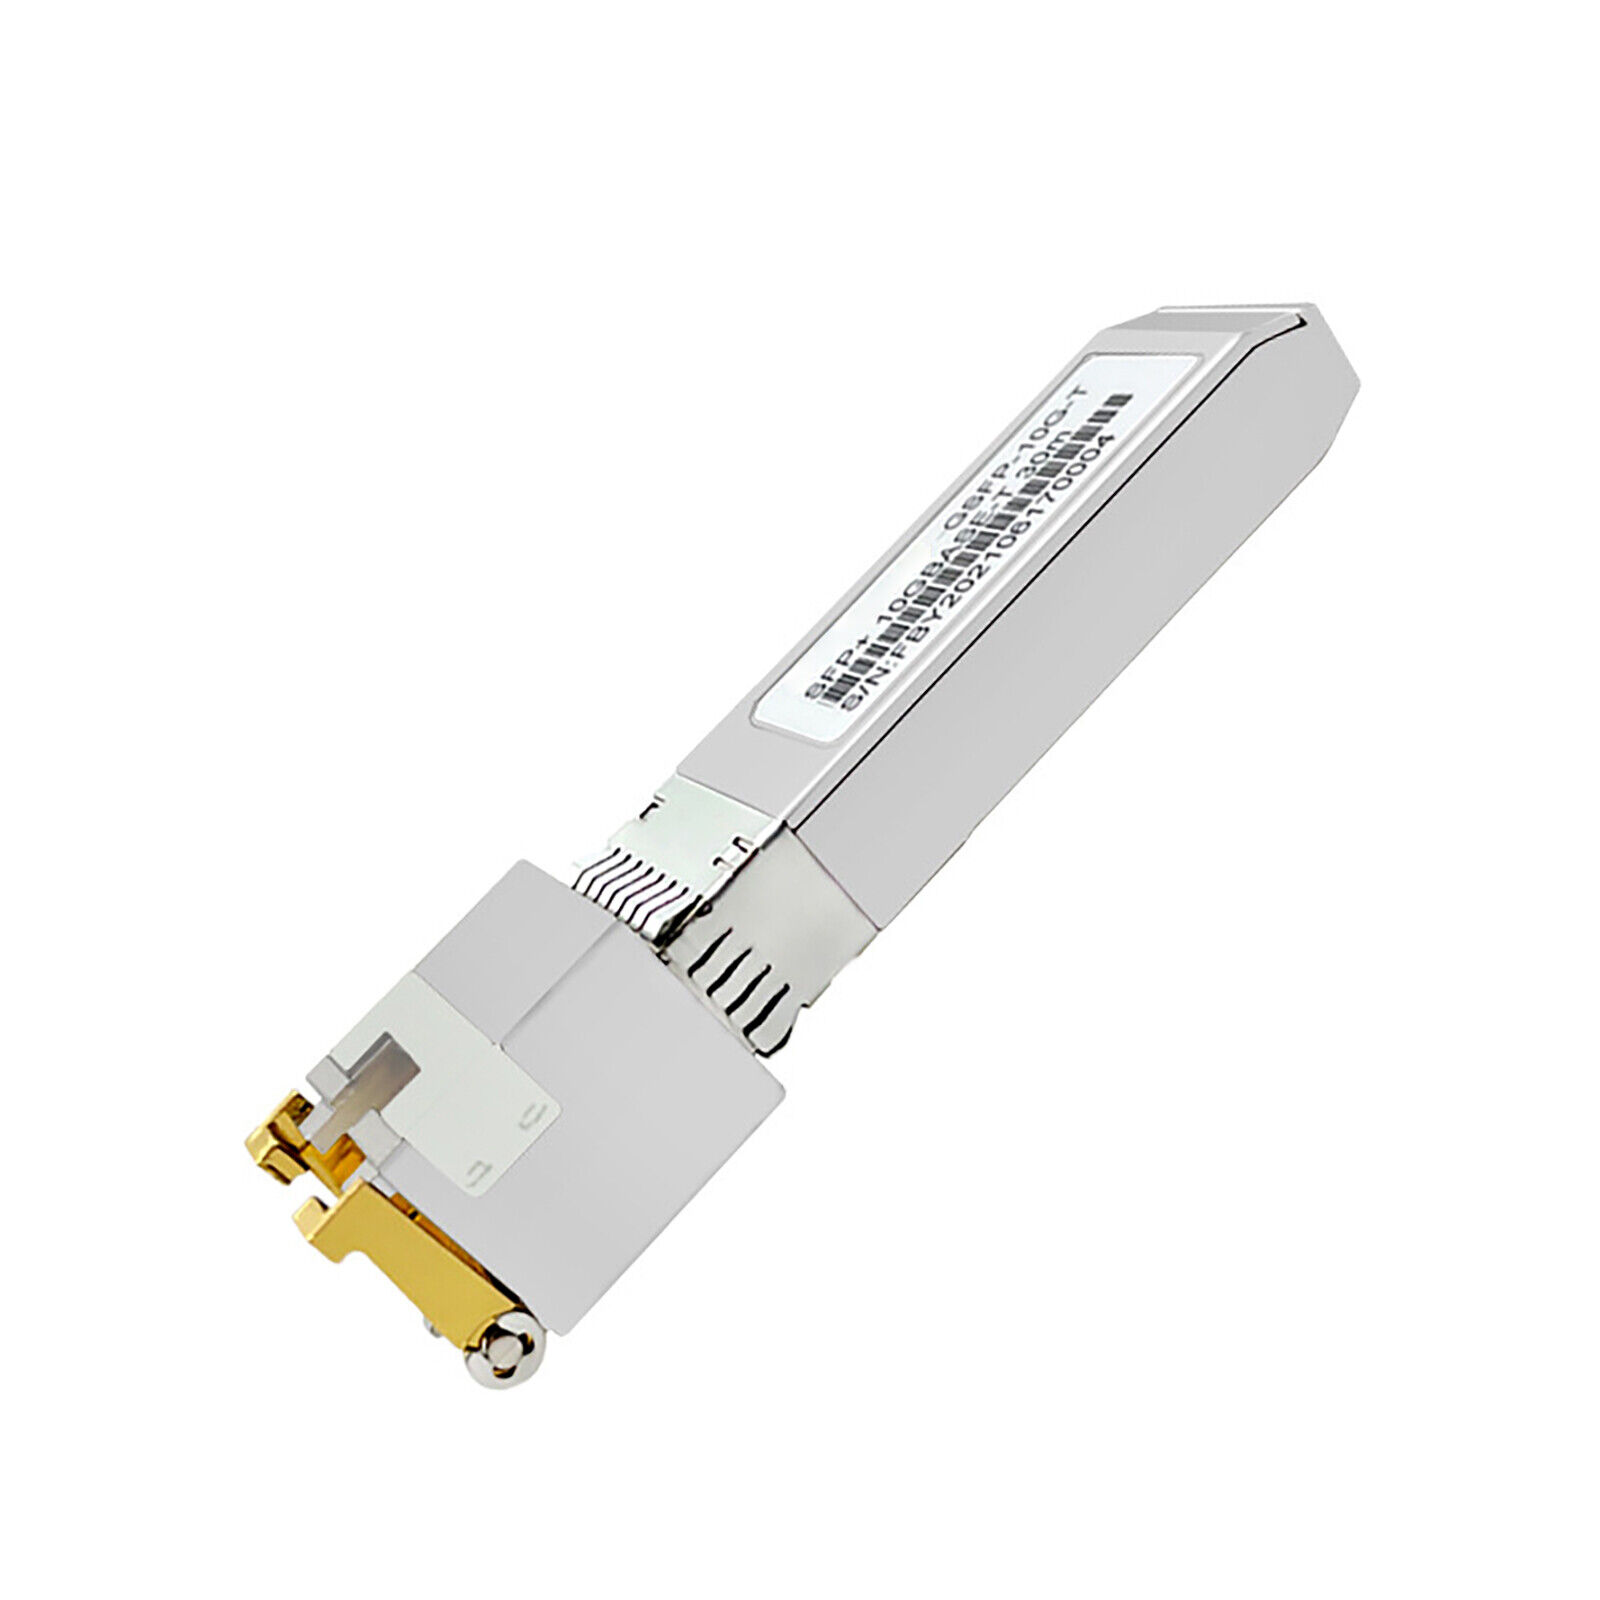 1Pcs 10GBase-T SFP+ to RJ45 Copper Ethernet Modular Kit Fit For Cisco Switches